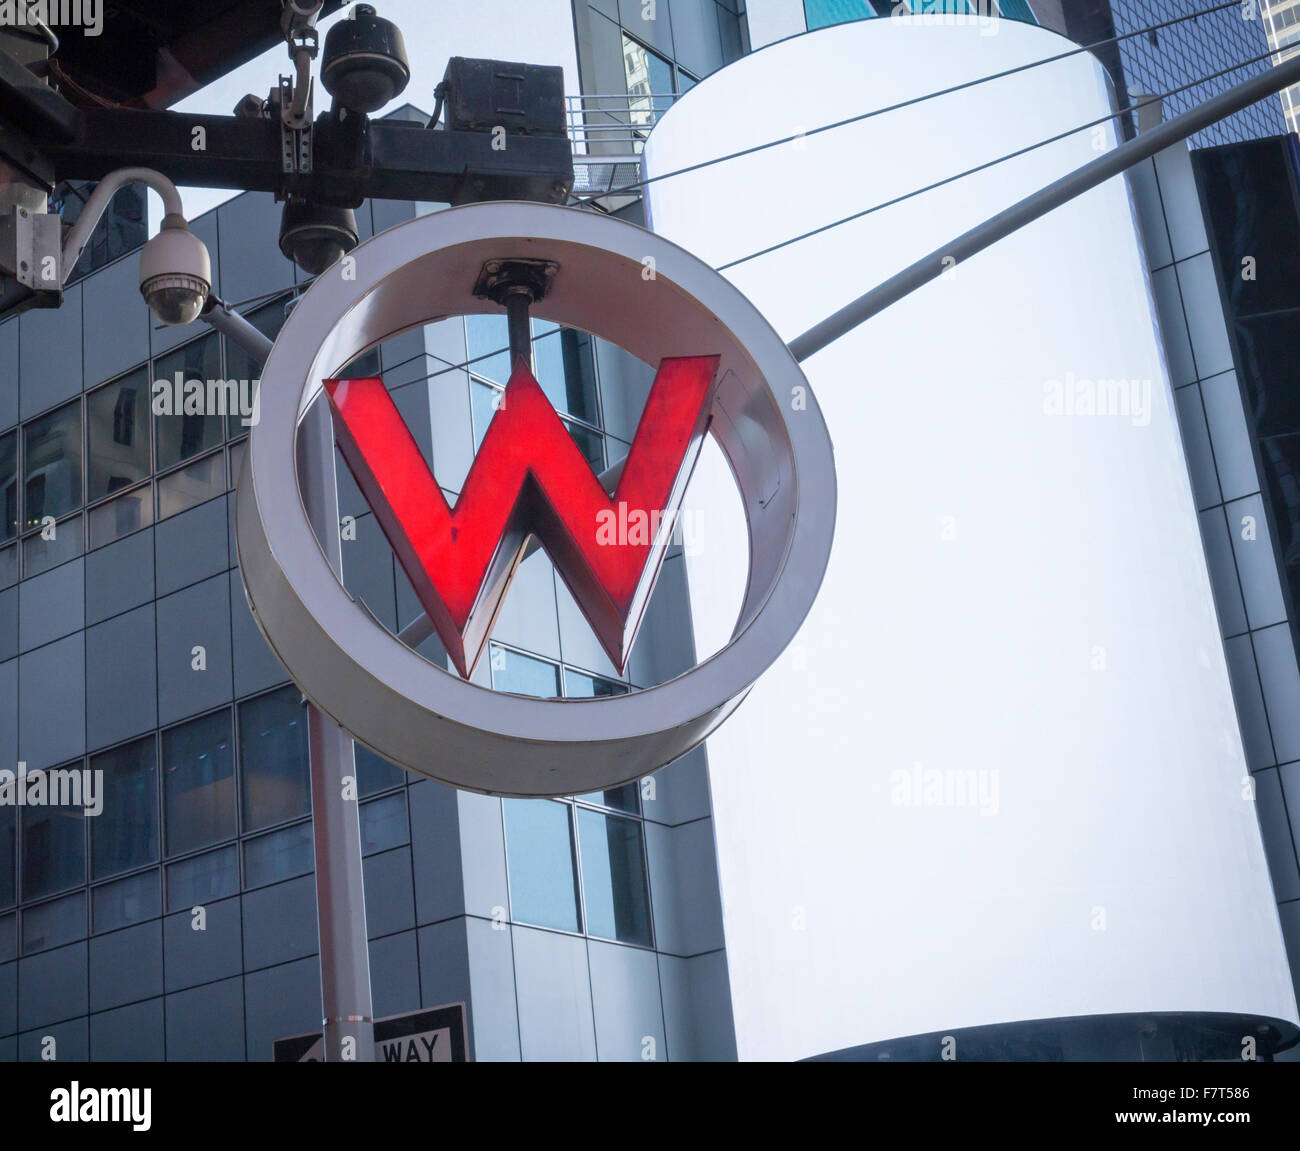 The W Hotel in Times Square in New York on Sunday, November 29, 2015. Marriott International has recently bid to acquire Starwood Hotels & Resorts, the owner of the W and other brands. The deal is pending approval and hinges on no other bids tendered. (© Richard B. Levine) Stock Photo